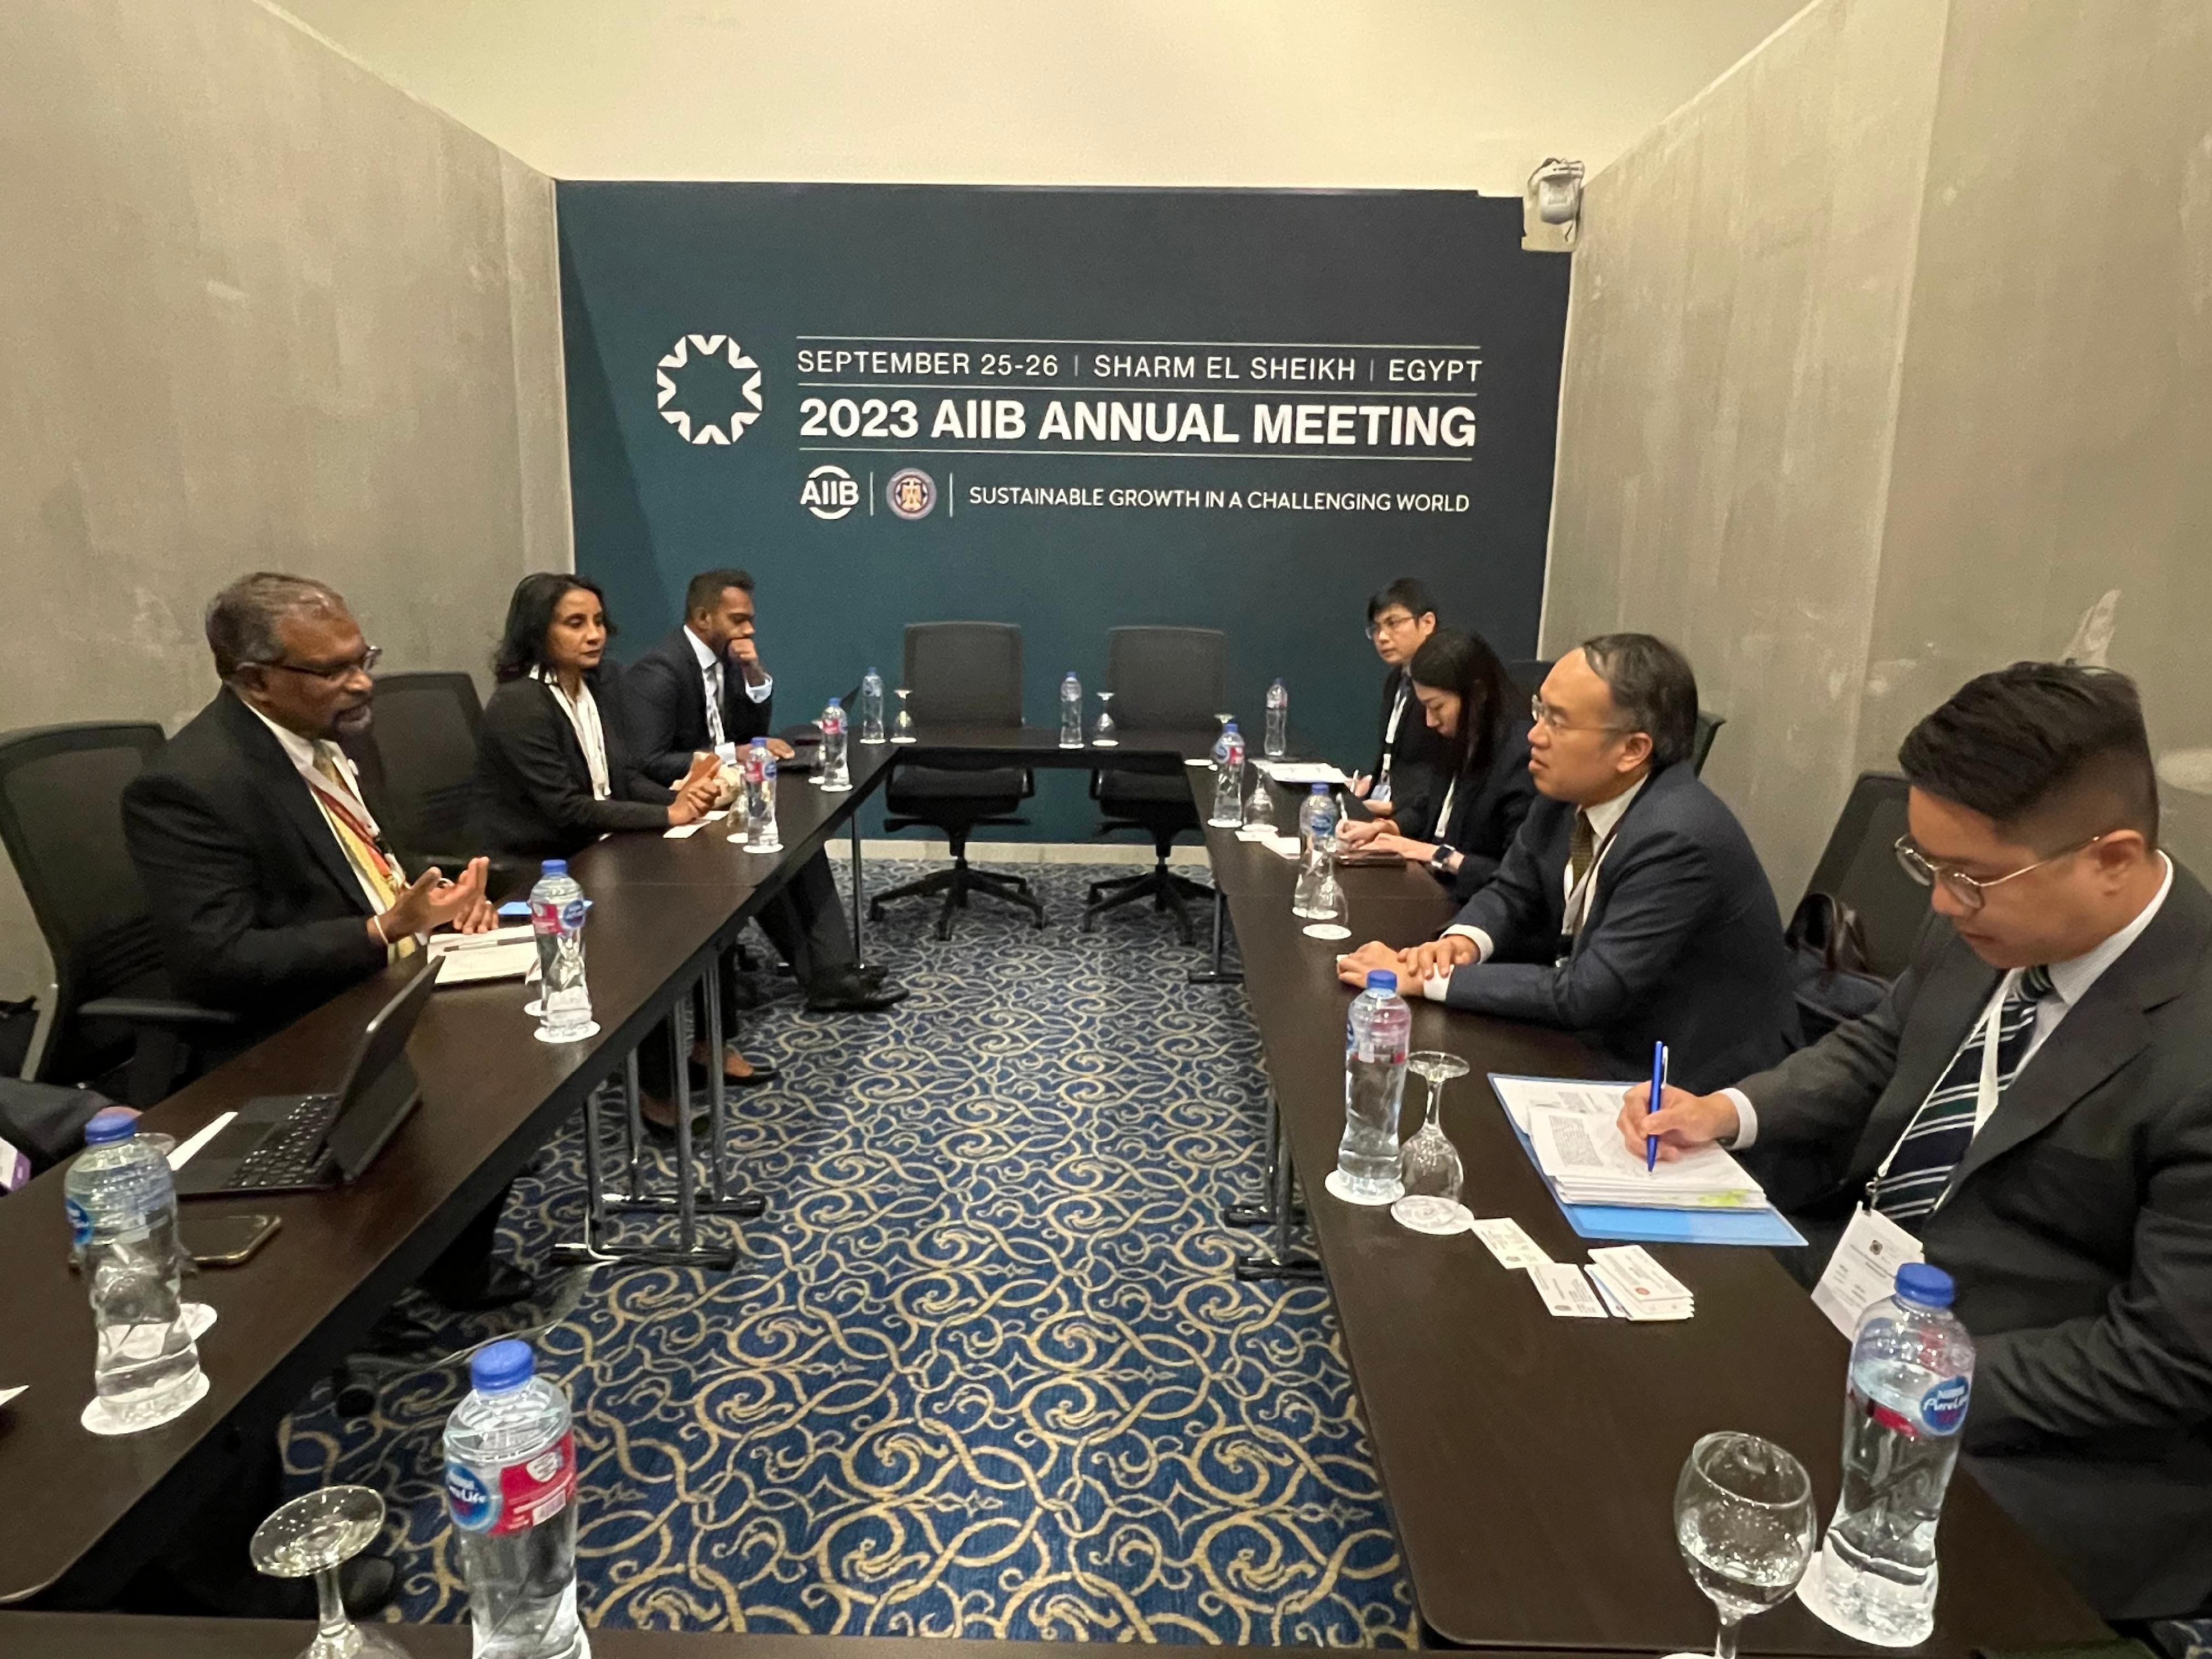 The Secretary for Financial Services and the Treasury, Mr Christopher Hui, continues his visit in Egypt. Photo shows Mr Hui (second right) meeting with the Secretary to the Treasury, Ministry of Finance of Sri Lanka, Mr K M Mahinda Siriwardana (first left), on the sidelines of the Eighth Annual Meeting of the Board of Governors of the Asian Infrastructure Investment Bank in Sharm El Sheikh on September 25 (Sharm El Sheikh time).